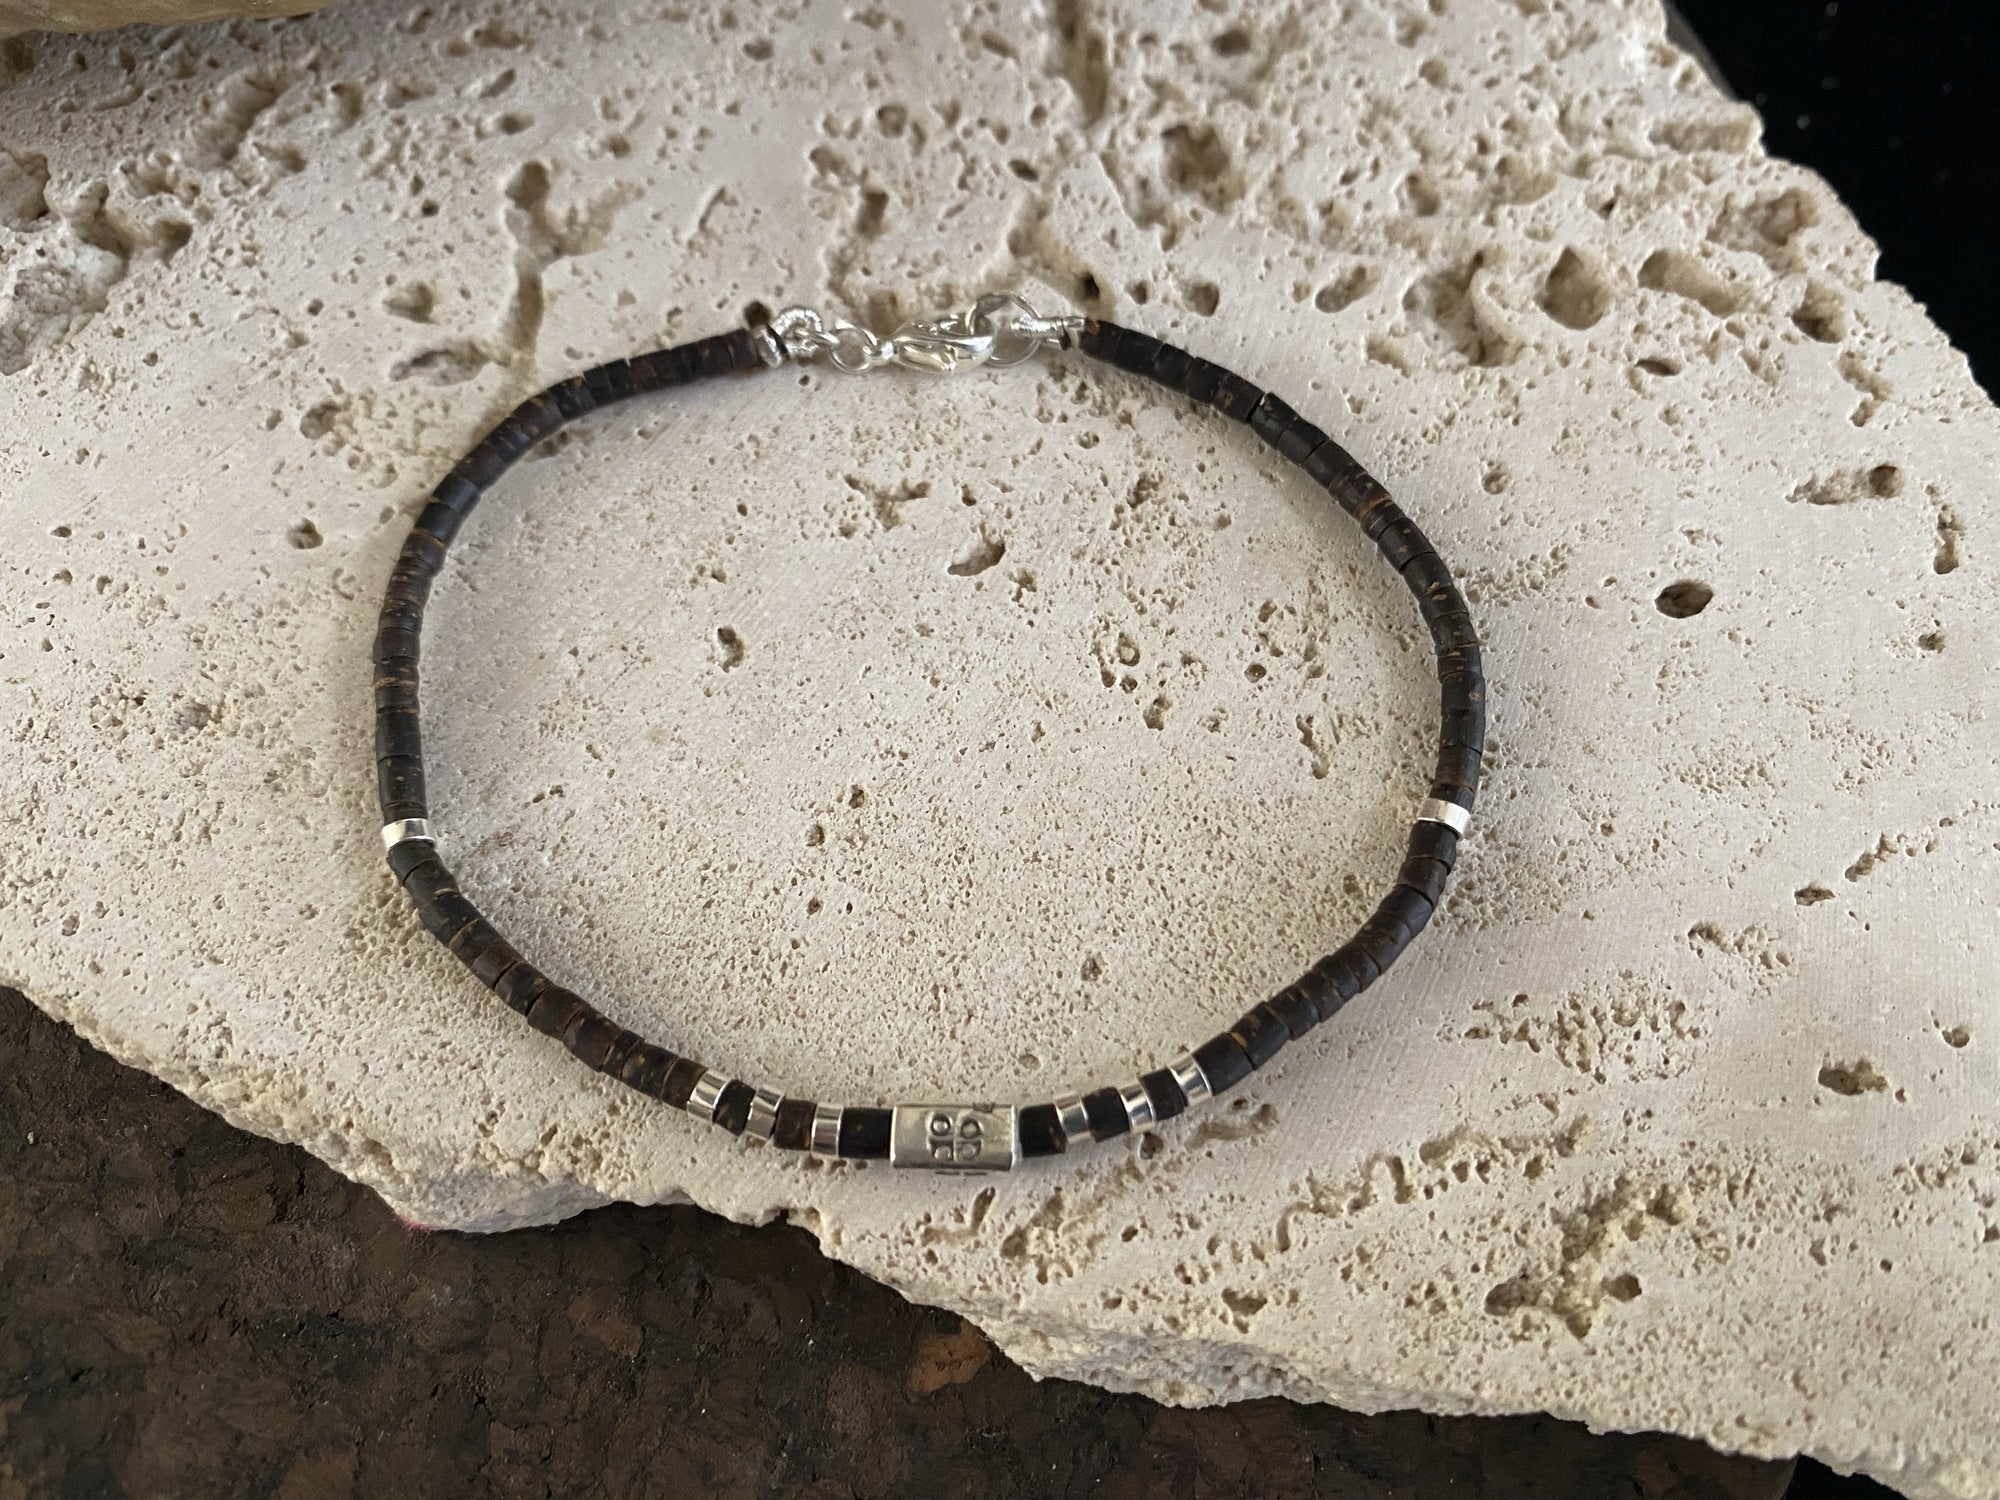 Our signature bracelet style, crafted from polished coconut wood and Karen hill tribe 95% silver. This women or men's bracelet has a casual Boho vibe, is understated, chic and modern, and is made for that stacked bracelet look.